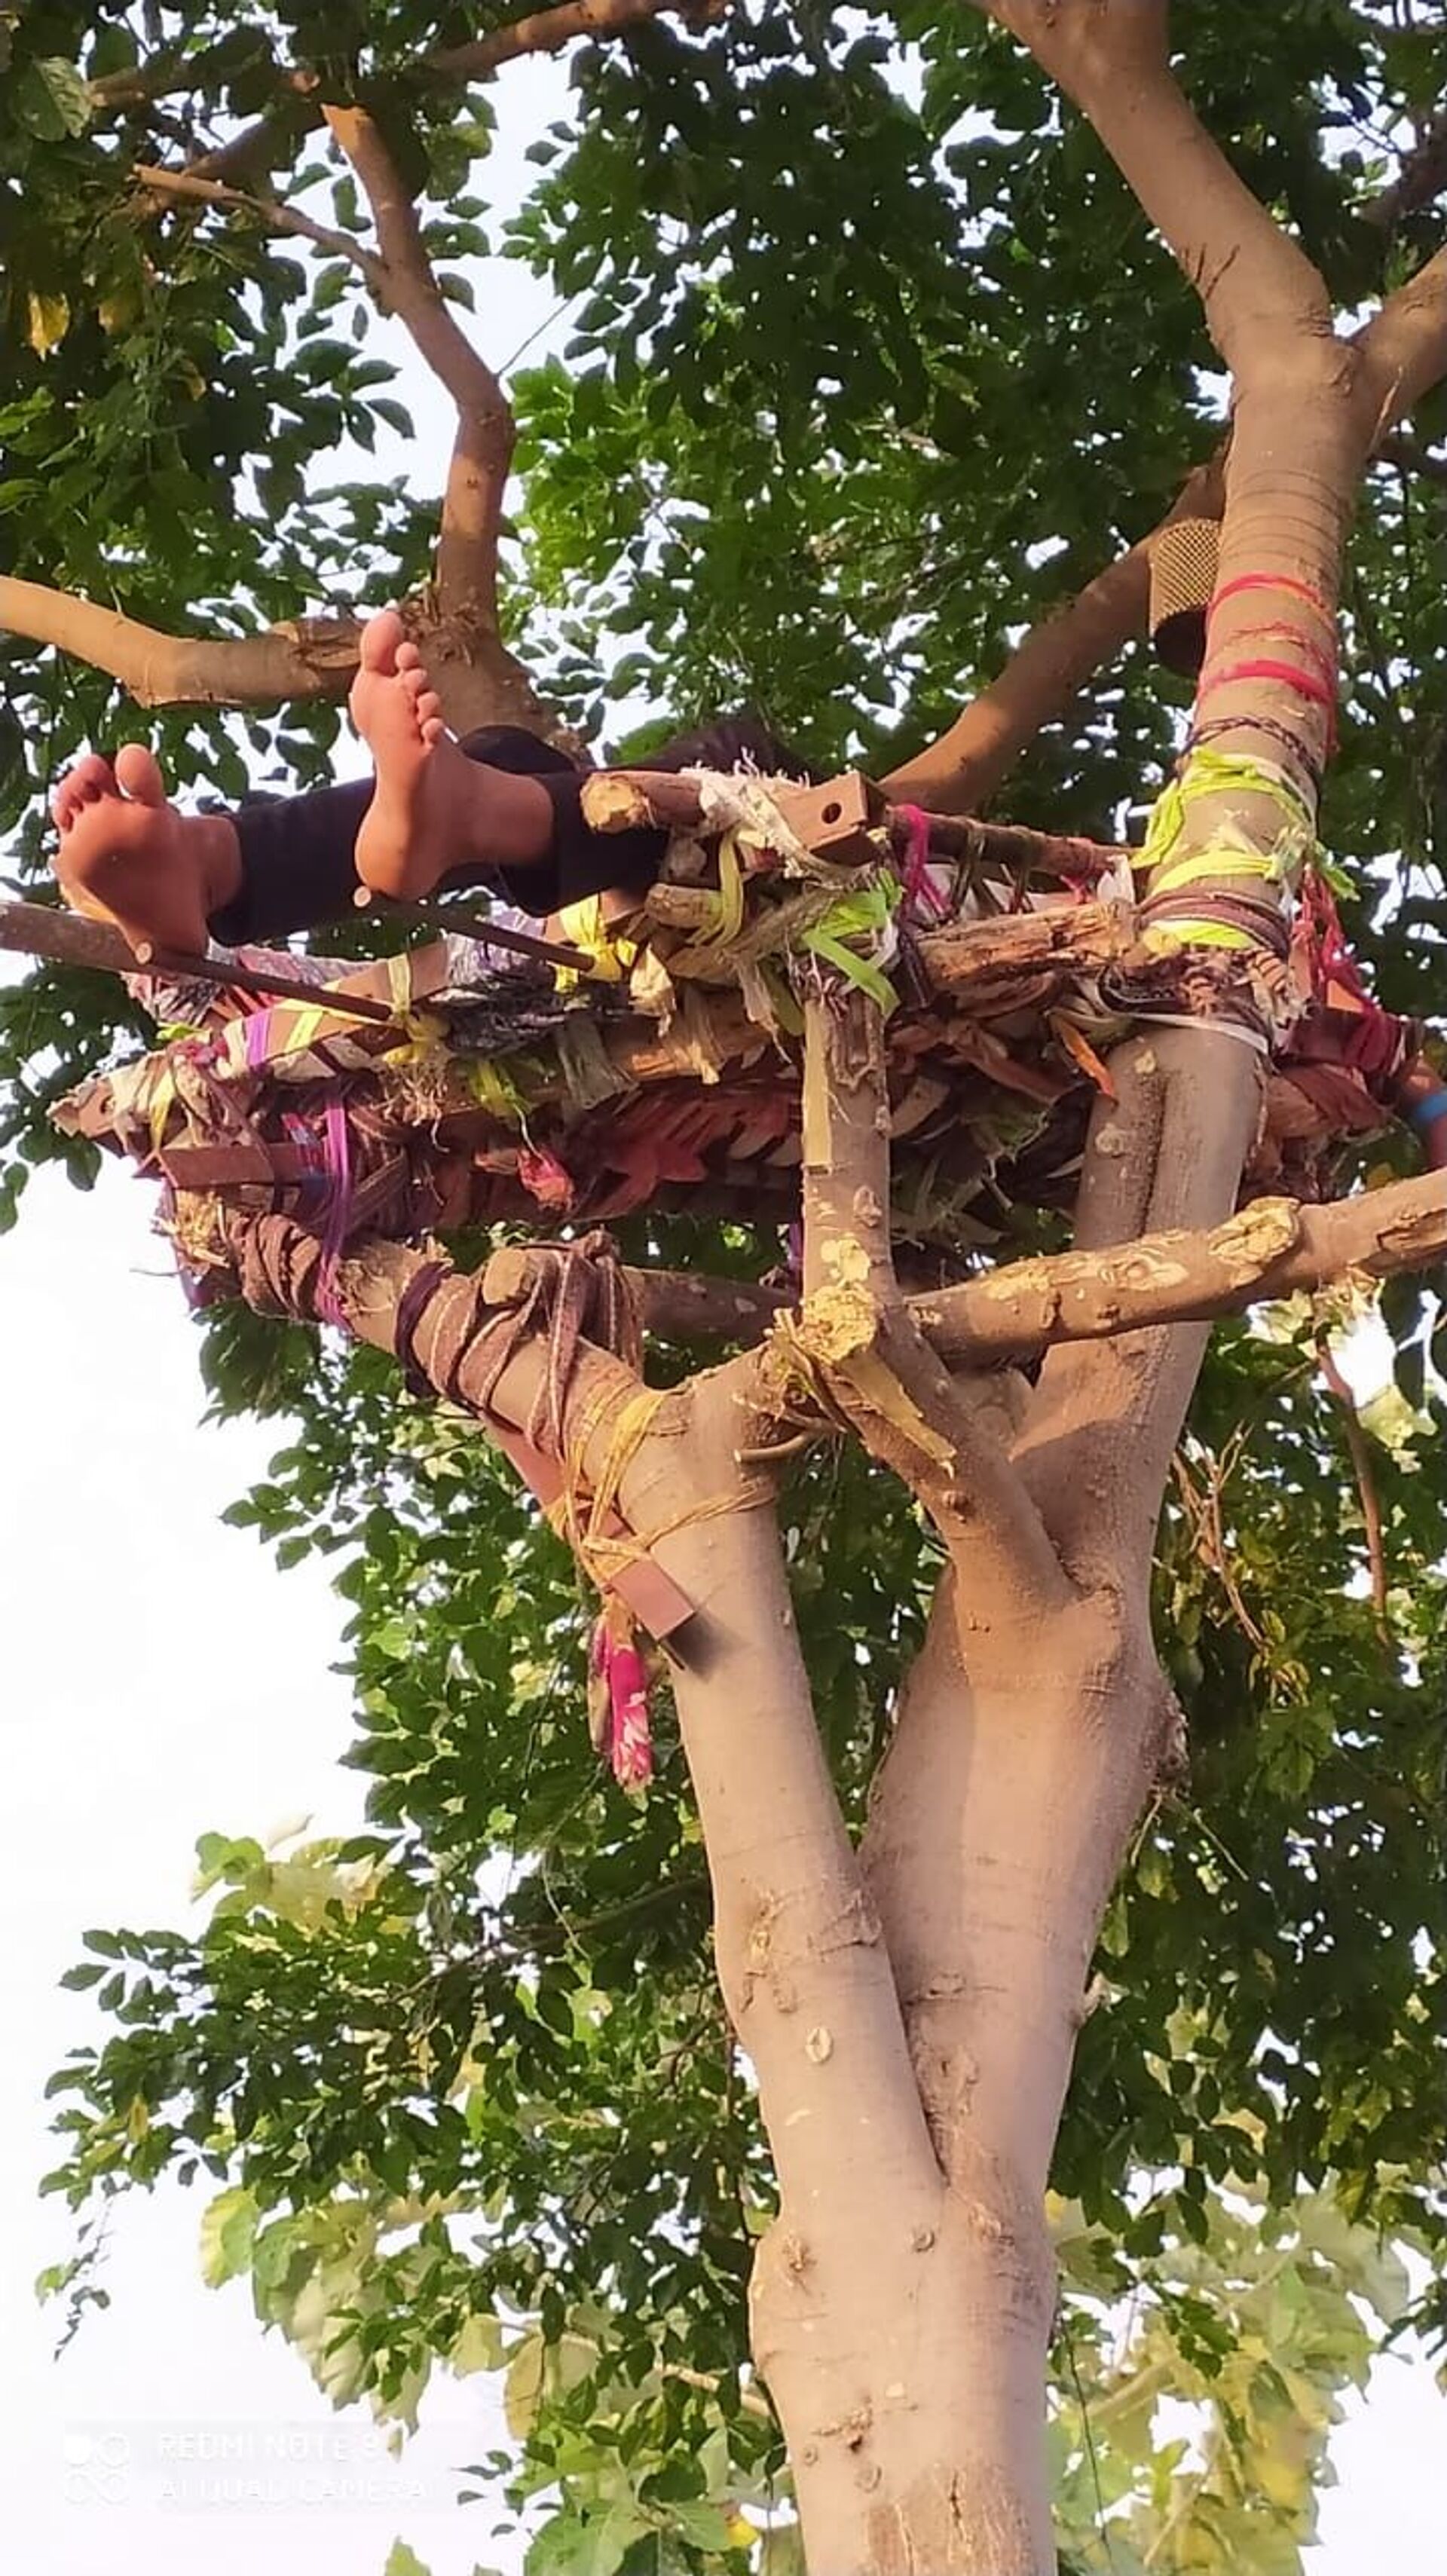 Man Builds Isolation Bed in Tree in Remote Indian Village as COVID Crisis Rages – Images - Sputnik International, 1920, 18.05.2021